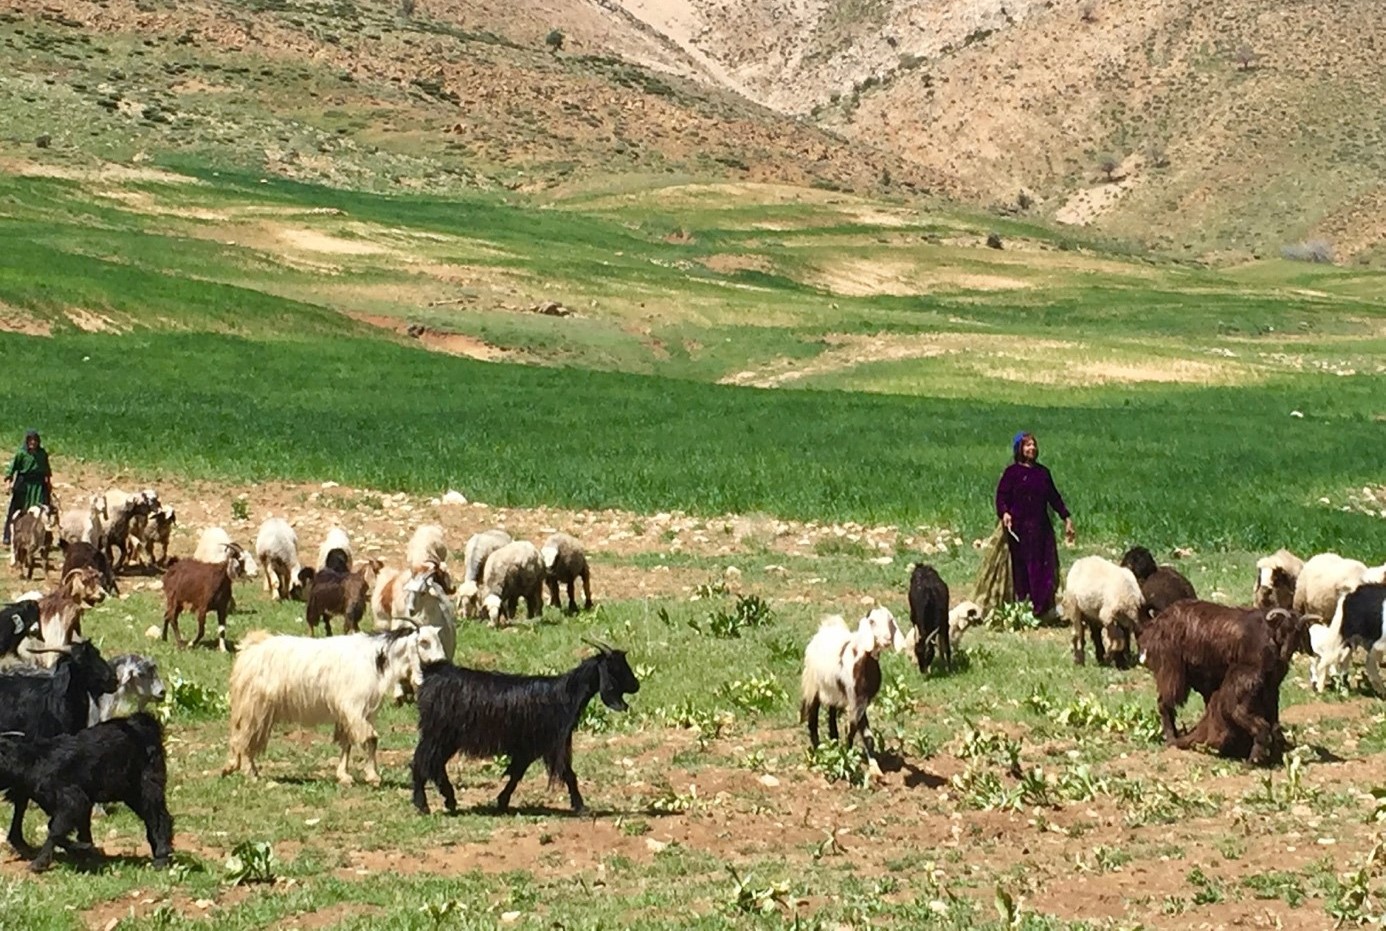 Female nomad and her sheep